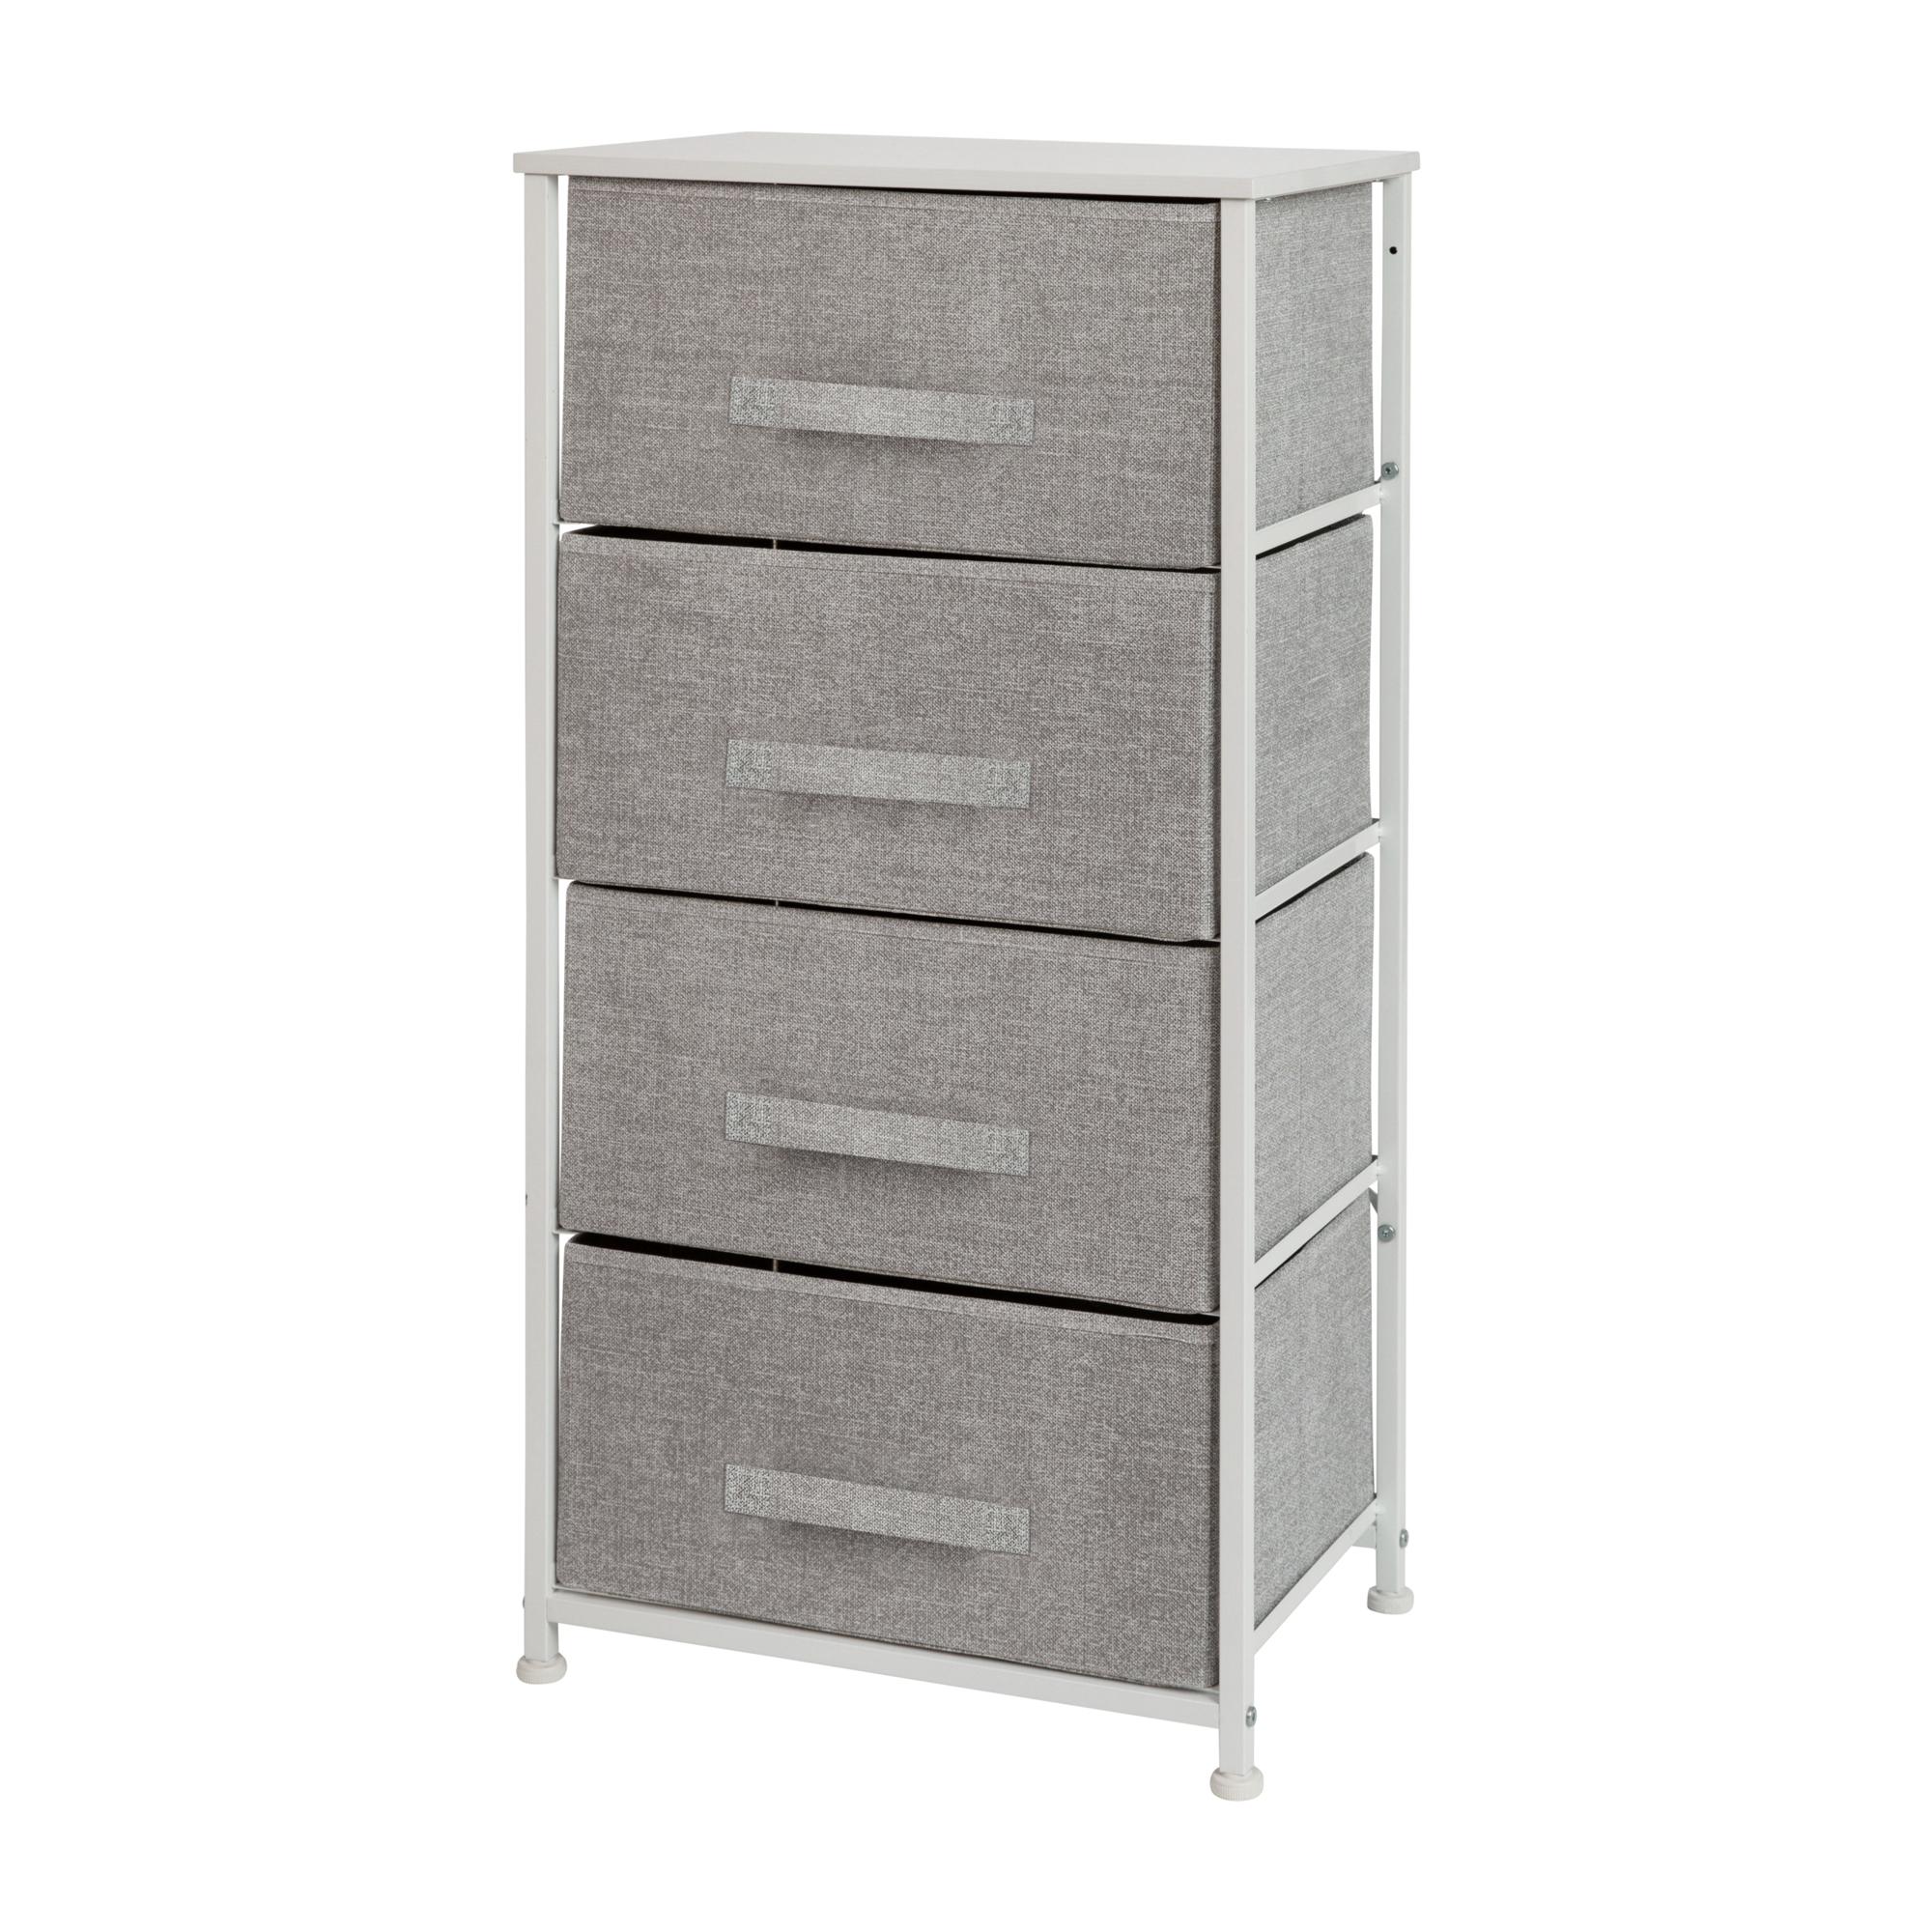 Flash Furniture, White/Gray 4 Drawer Storage Dresser Organizer, Height 37.25 in, Width 17.75 in, Color White, Model WX5L203XWHGR